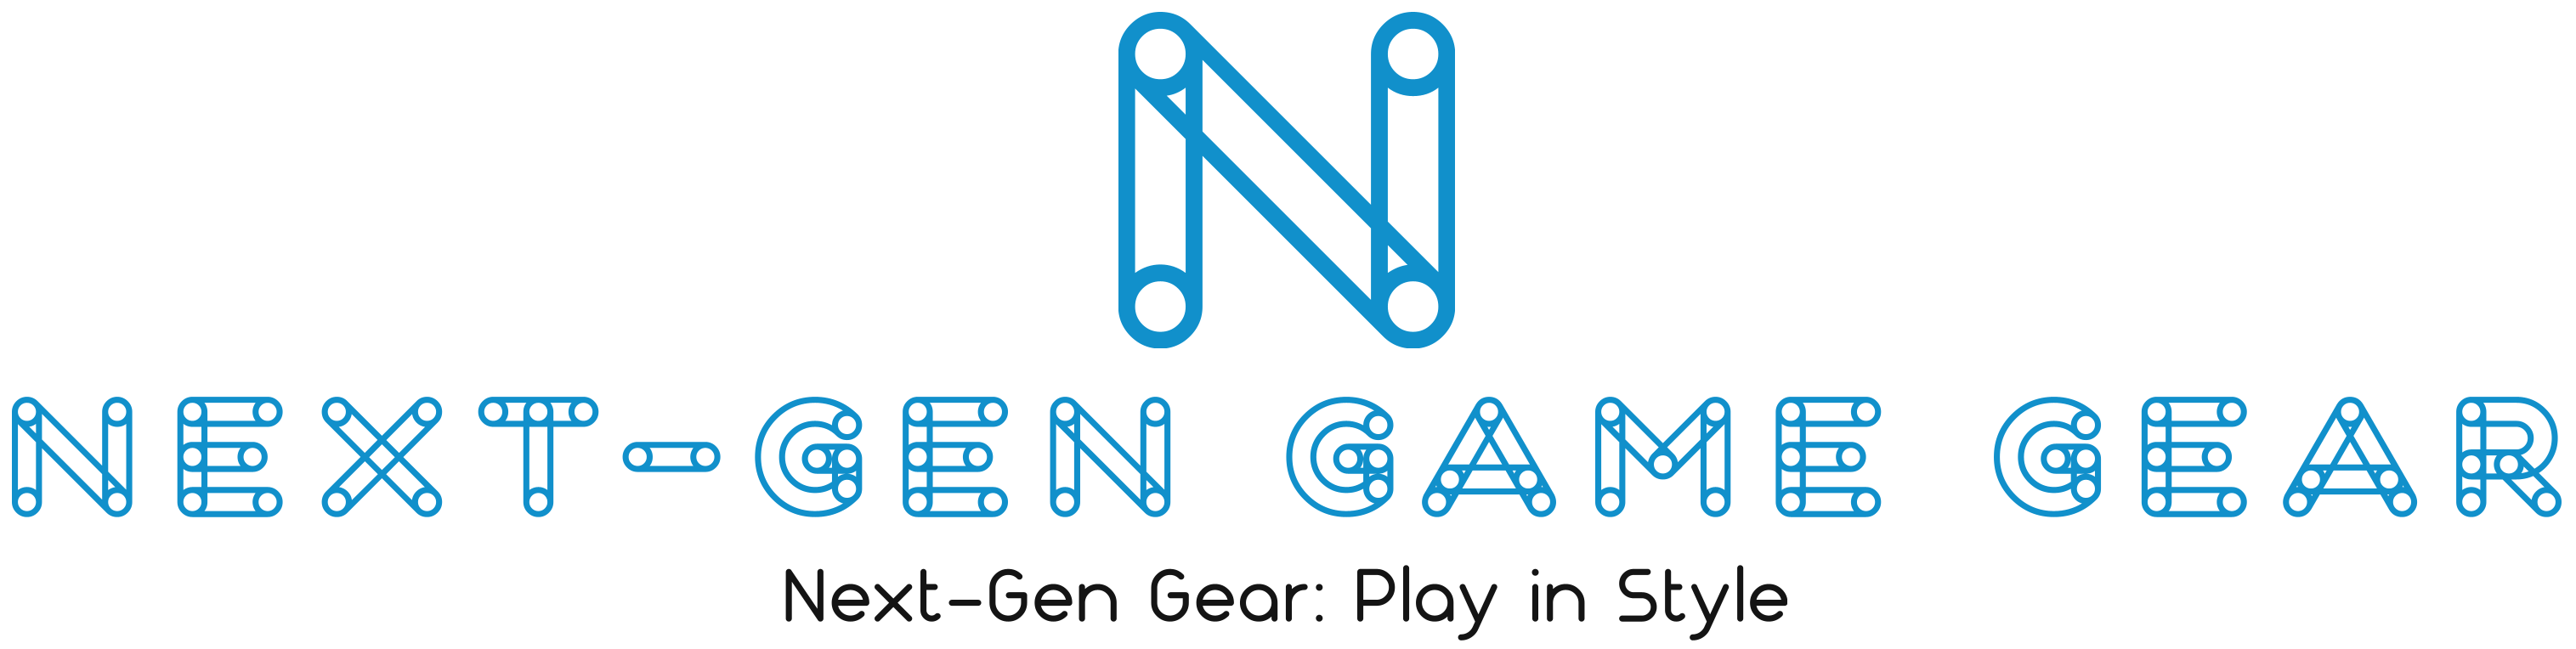 Get More Coupon Codes And Deals At Next-Gen Game Gear